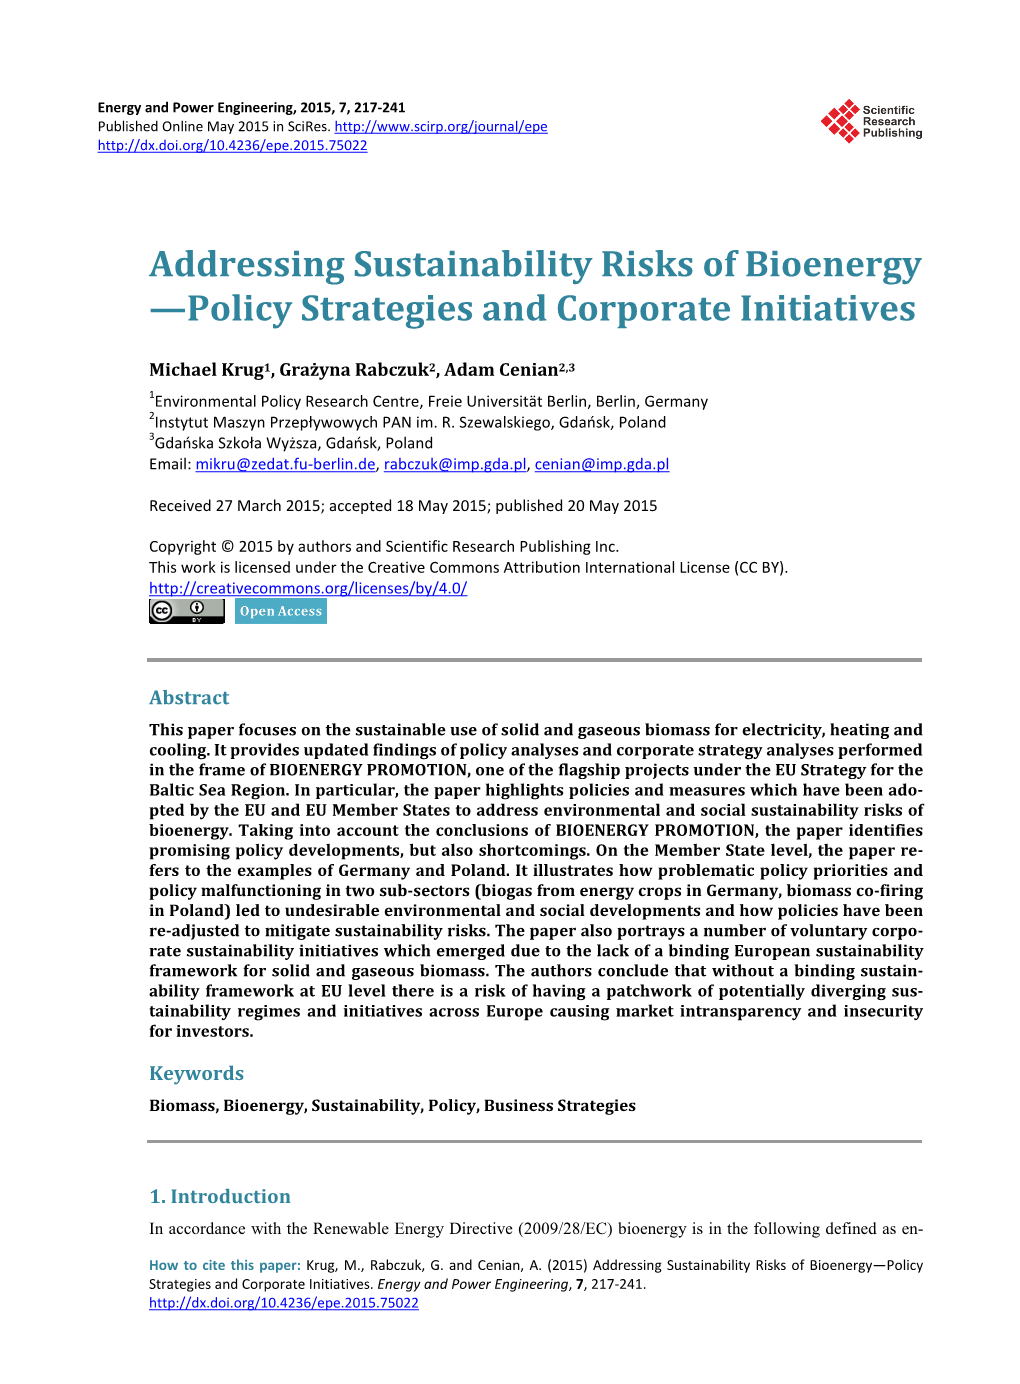 Addressing Sustainability Risks of Bioenergy —Policy Strategies and Corporate Initiatives